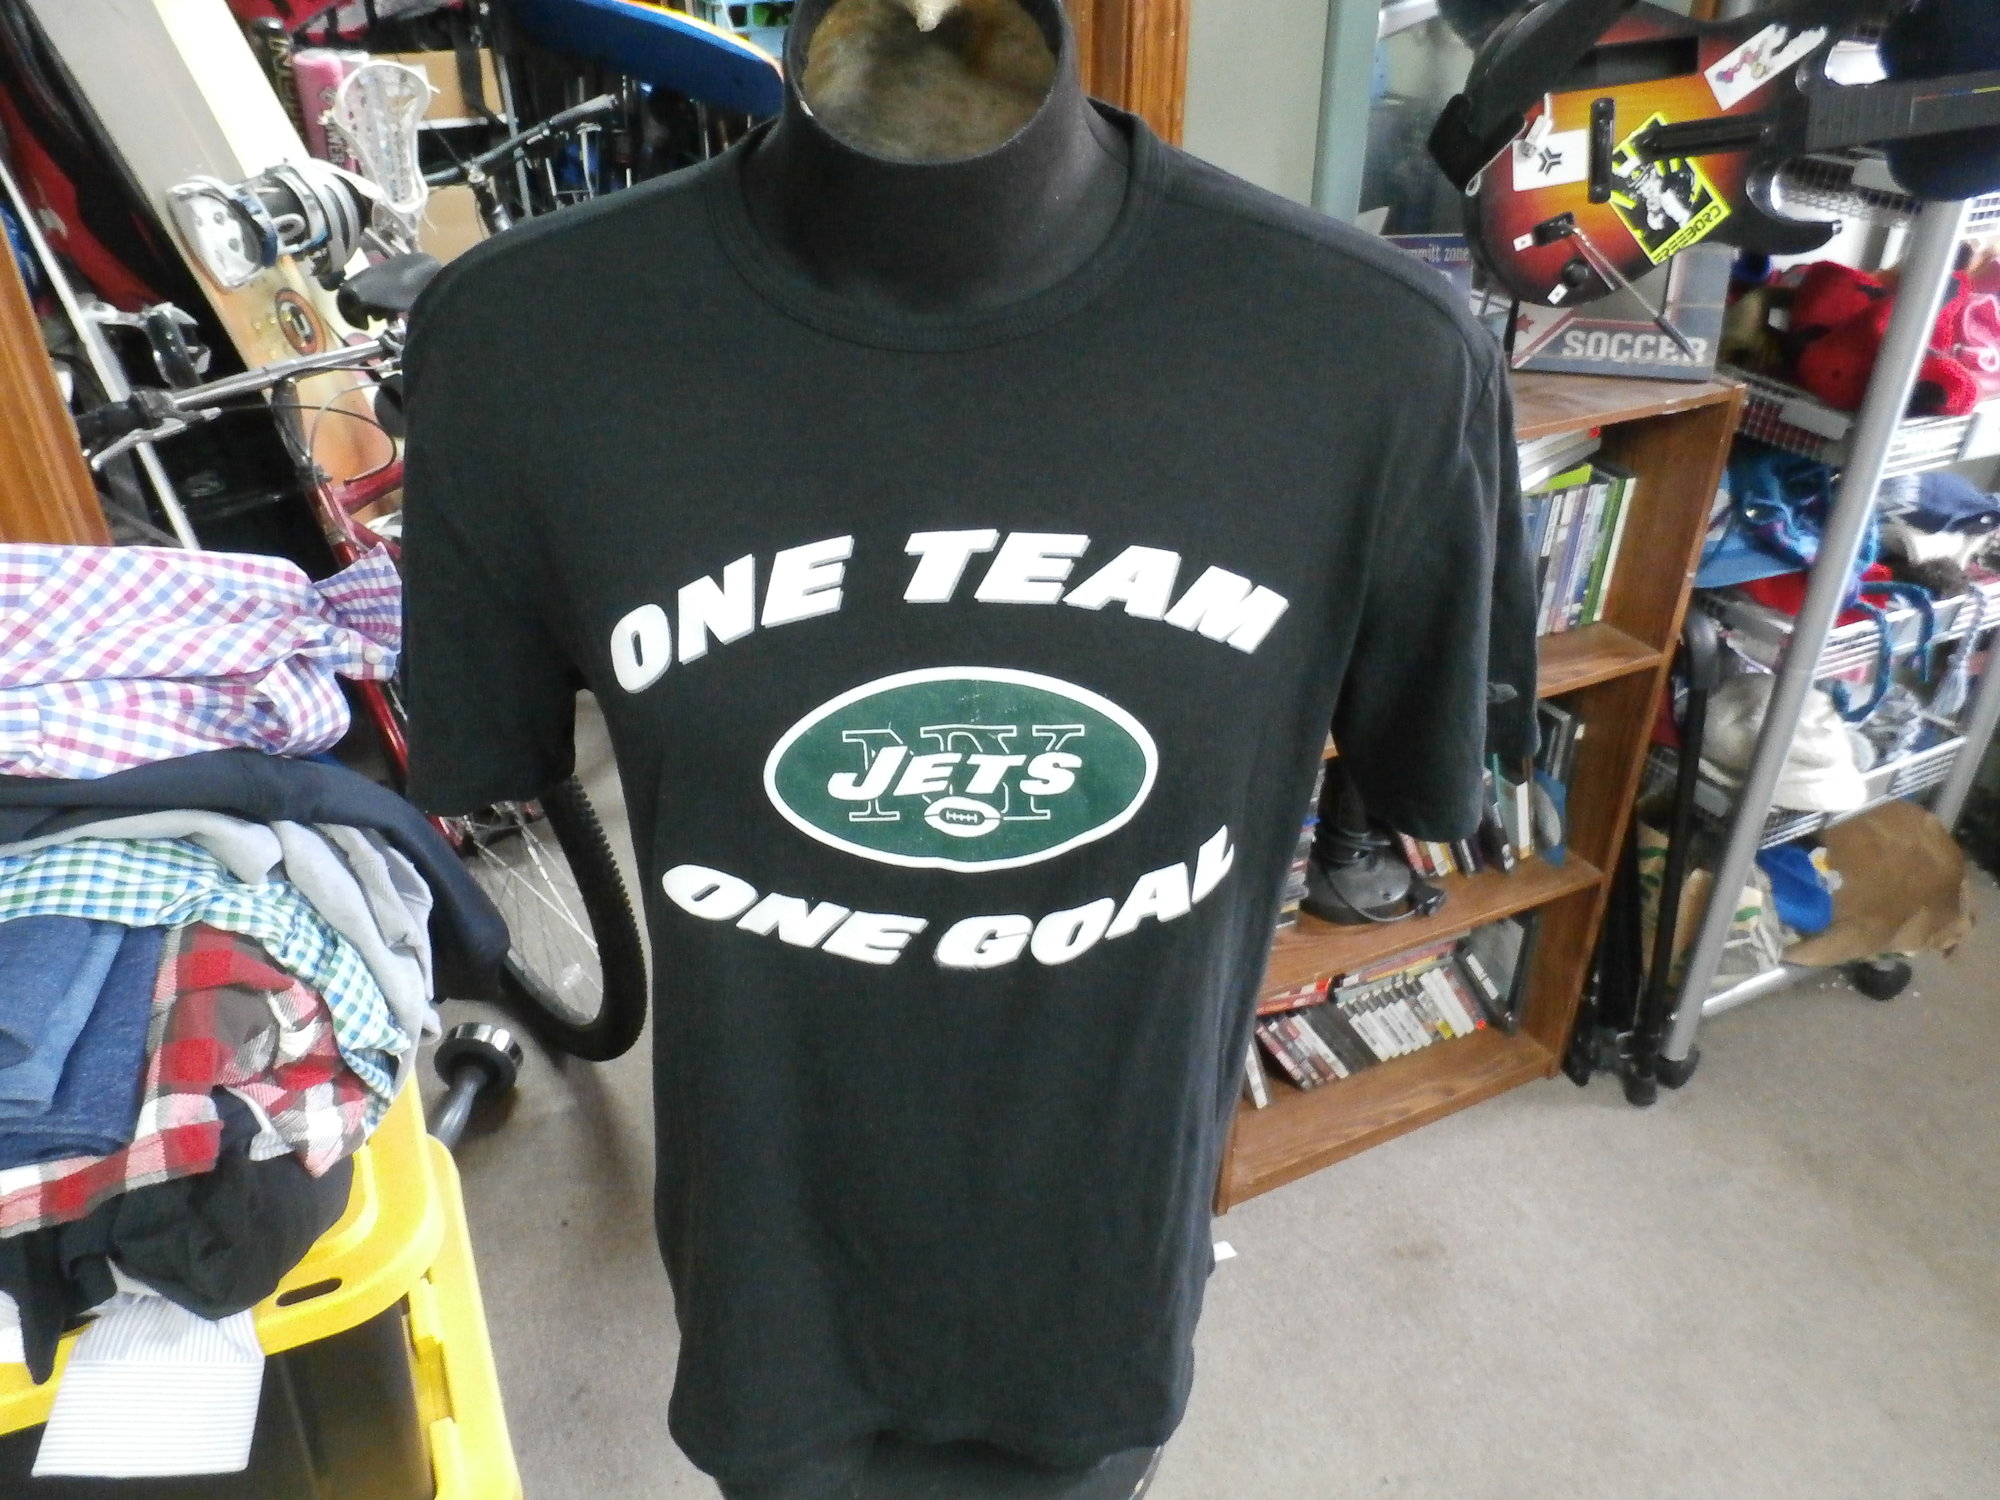 New York Jets \"One Team\" New Era shirt black size tag missing polyblend #29282
Rating: (see below) 3- Good Condition
Team: New York Jets
Player: n/a
Brand: New Era
Size: Tag missing- (Measured Flat: Across chest 21\"; Length 28\")
Measured Flat: underarm to underarm; top of shoulder to bottom hem
Color: black
Style: short sleeve; screen printed
Material: 50% polyester 38% cotton 12% rayon
Condition: 3- Good Condition: minor wear and fuzz from use; printing defect on \"G\" on front (see photos)
Item #: 29282
Shipping: FREE